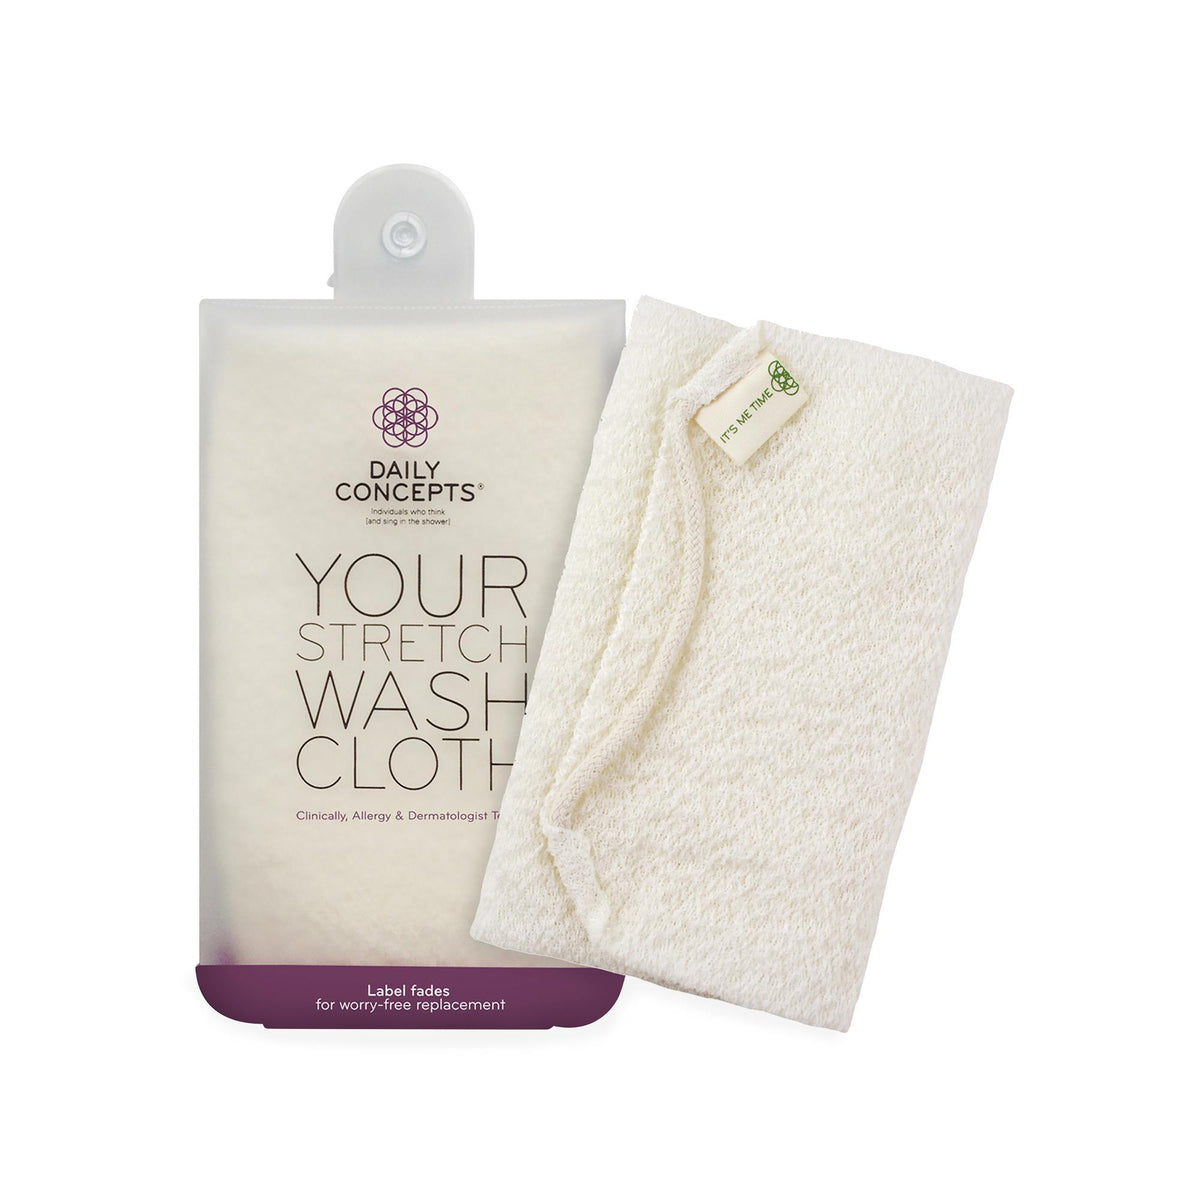 Daily Concepts Your Stretch Wash Cloth